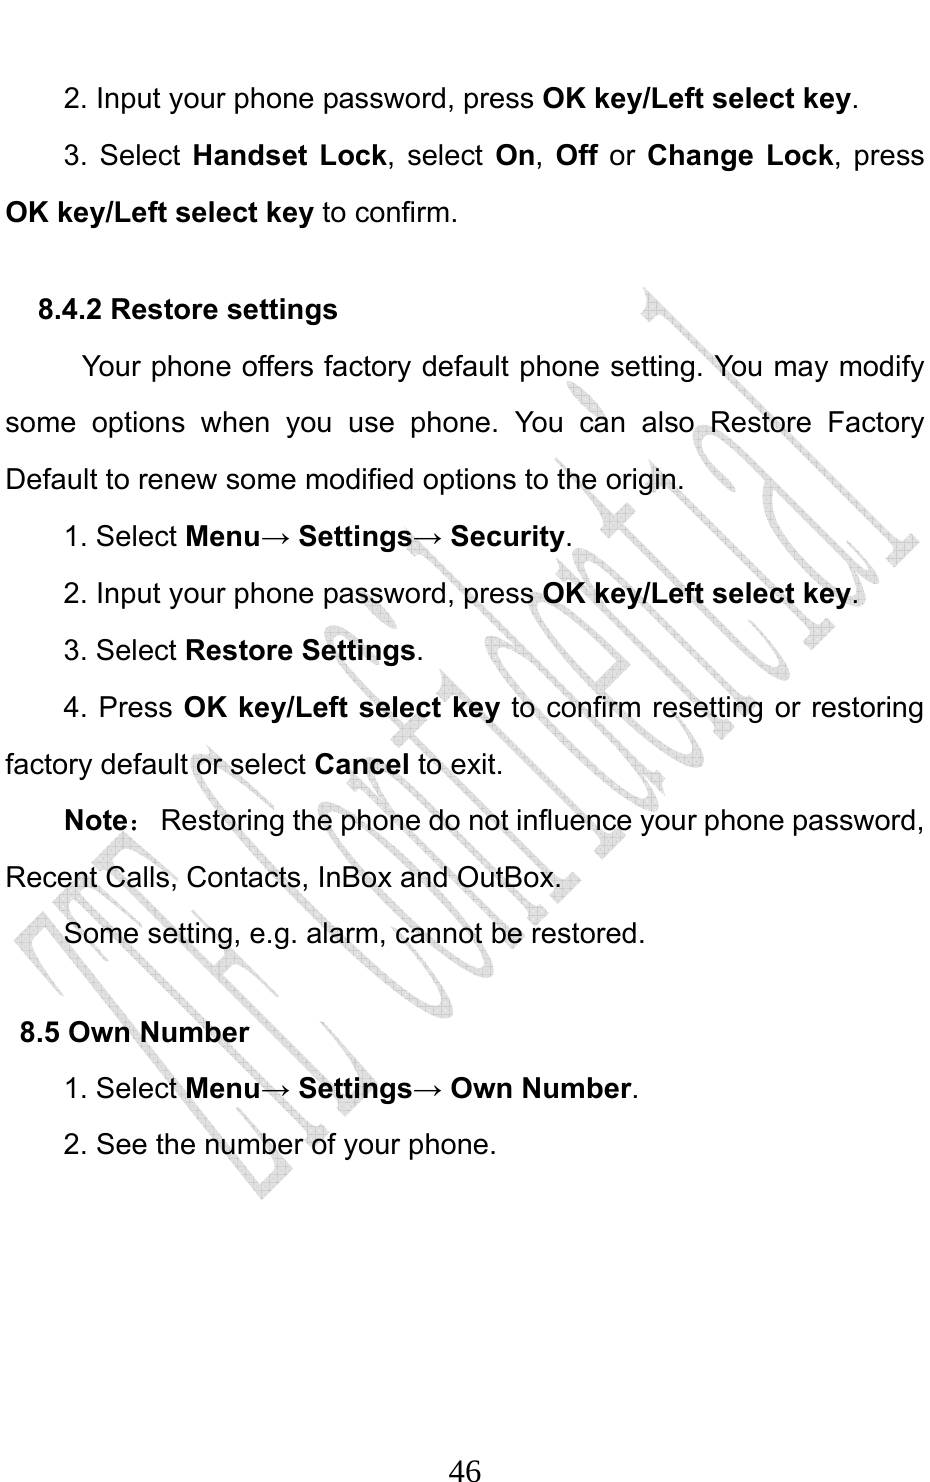                              462. Input your phone password, press OK key/Left select key. 3. Select Handset Lock, select On, Off or Change Lock, press OK key/Left select key to confirm. 8.4.2 Restore settings Your phone offers factory default phone setting. You may modify some options when you use phone. You can also Restore Factory Default to renew some modified options to the origin.   1. Select Menu→ Settings→ Security. 2. Input your phone password, press OK key/Left select key. 3. Select Restore Settings. 4. Press OK key/Left select key to confirm resetting or restoring factory default or select Cancel to exit. Note：  Restoring the phone do not influence your phone password,   Recent Calls, Contacts, InBox and OutBox.   Some setting, e.g. alarm, cannot be restored. 8.5 Own Number 1. Select Menu→ Settings→ Own Number. 2. See the number of your phone.     